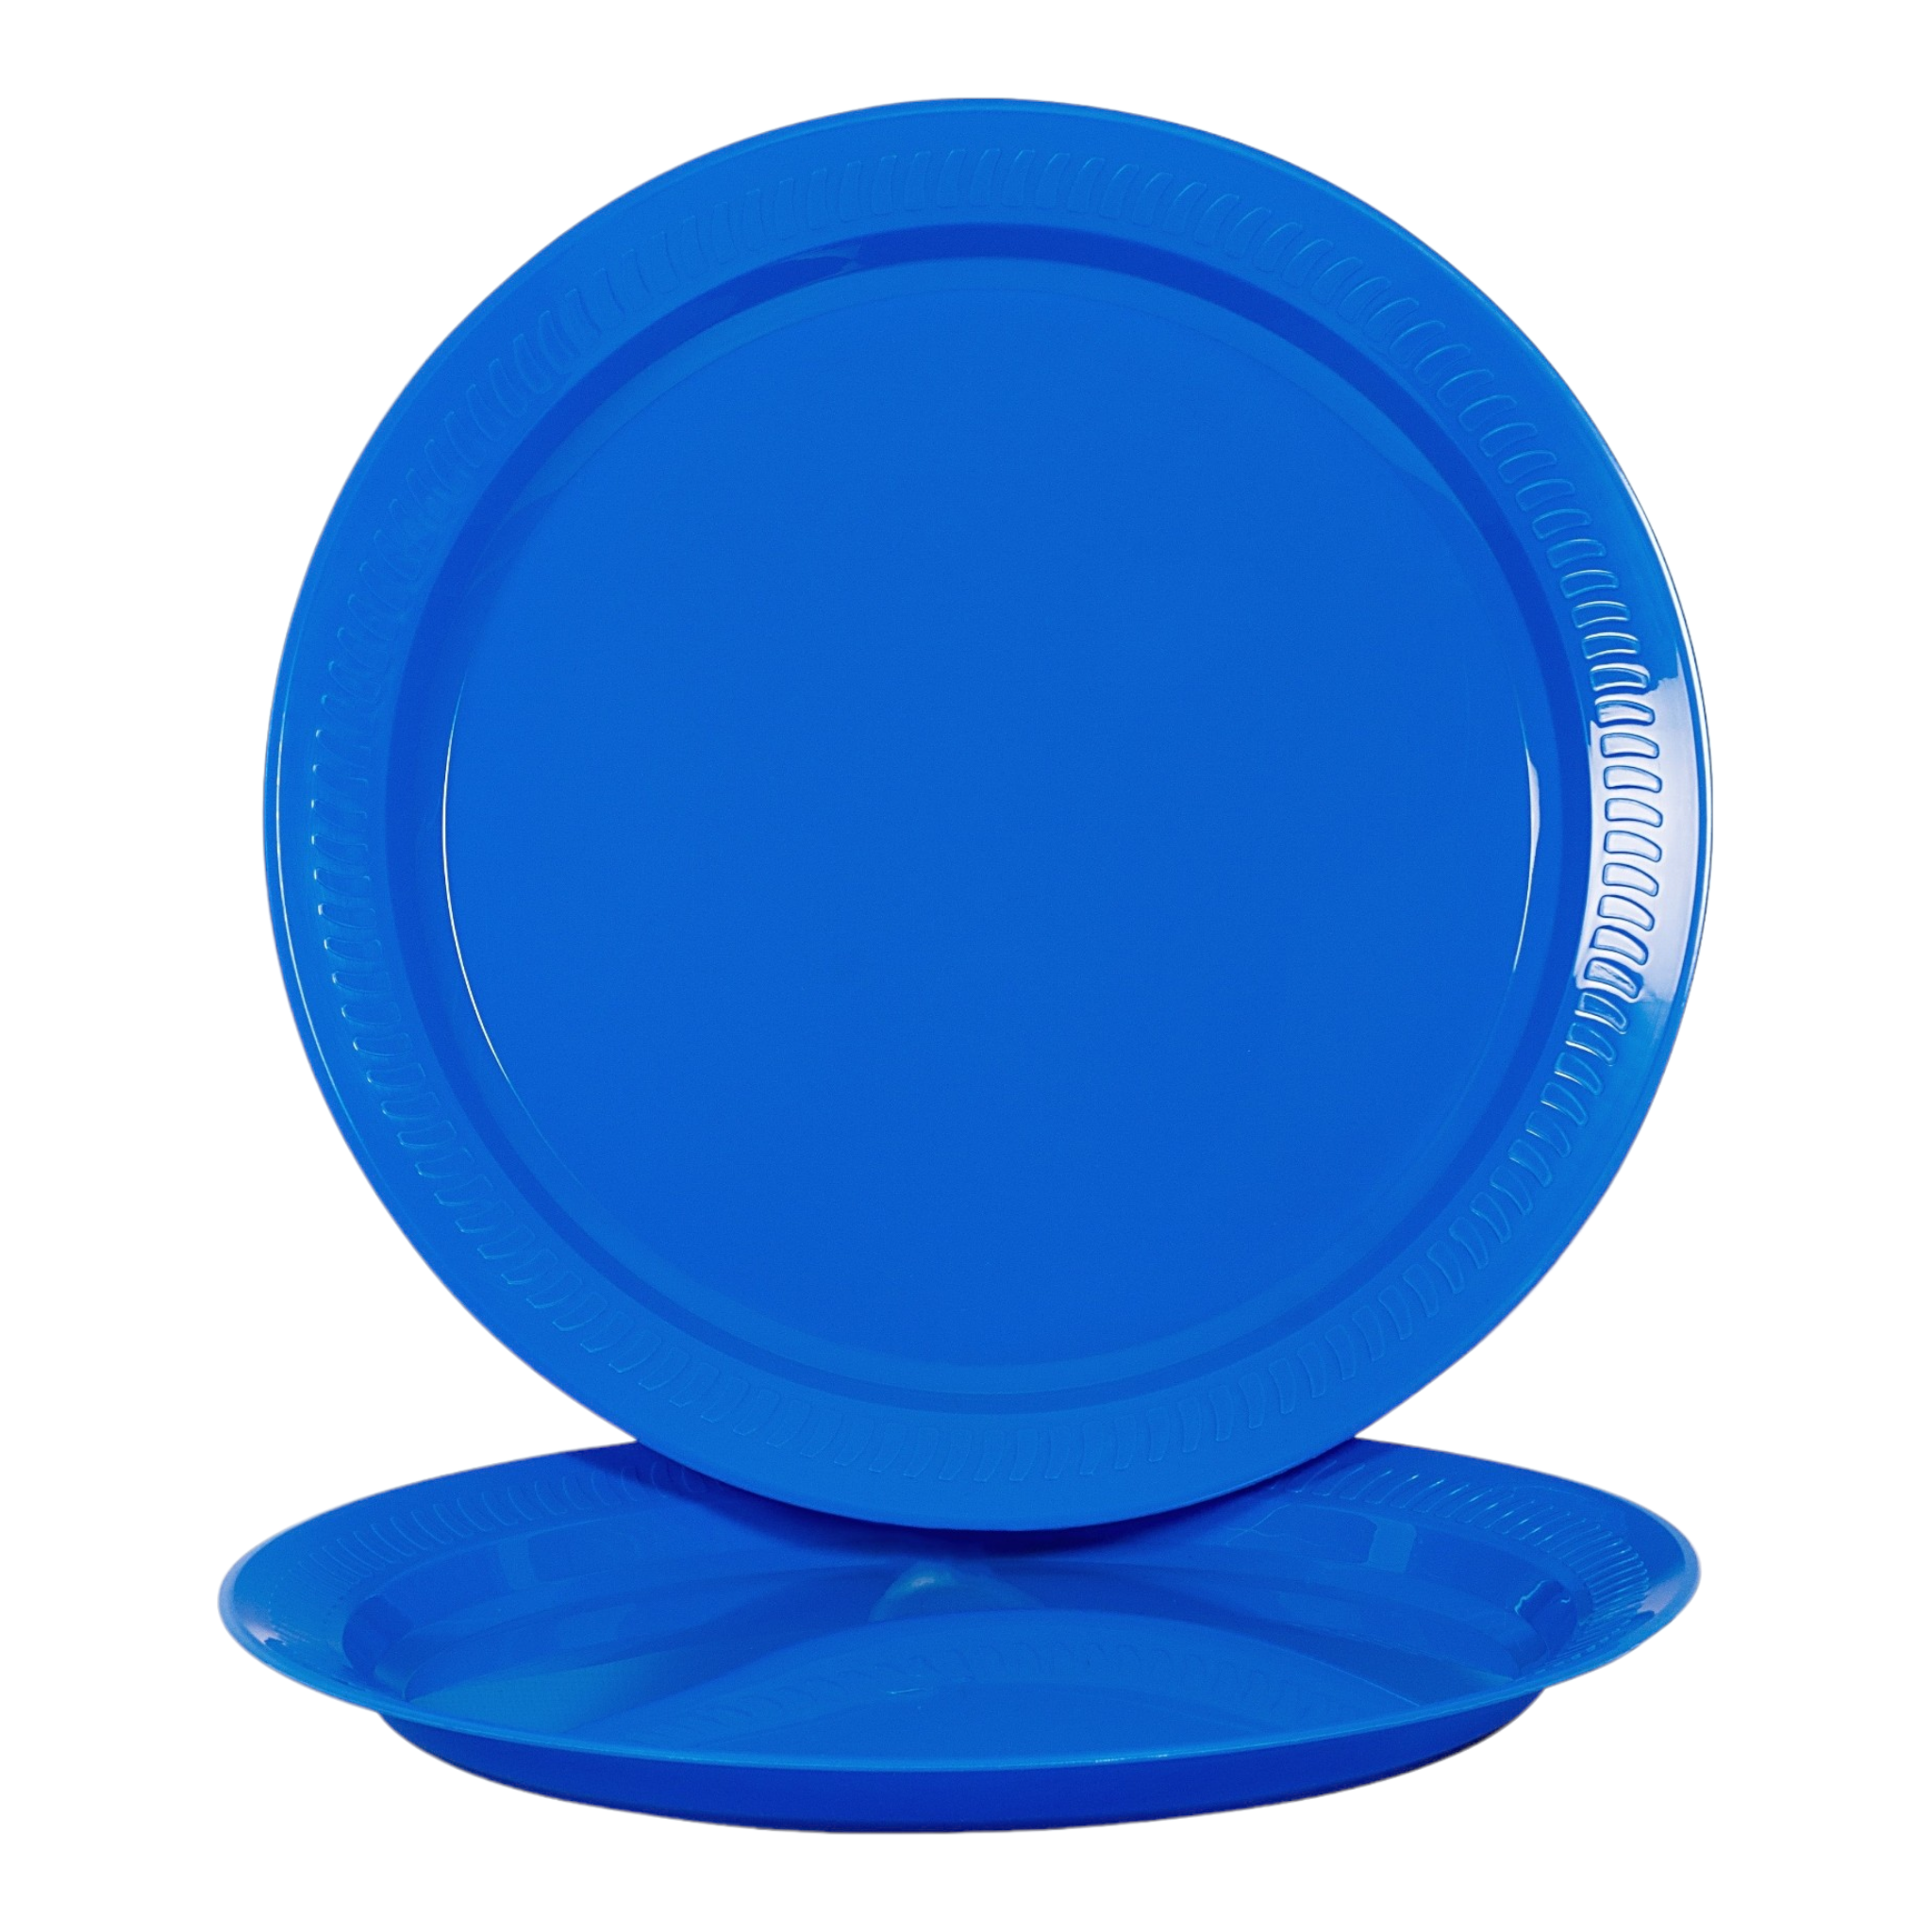 Plastic Catering Side Plates 85mm 10pack Assorted Colors Buzz